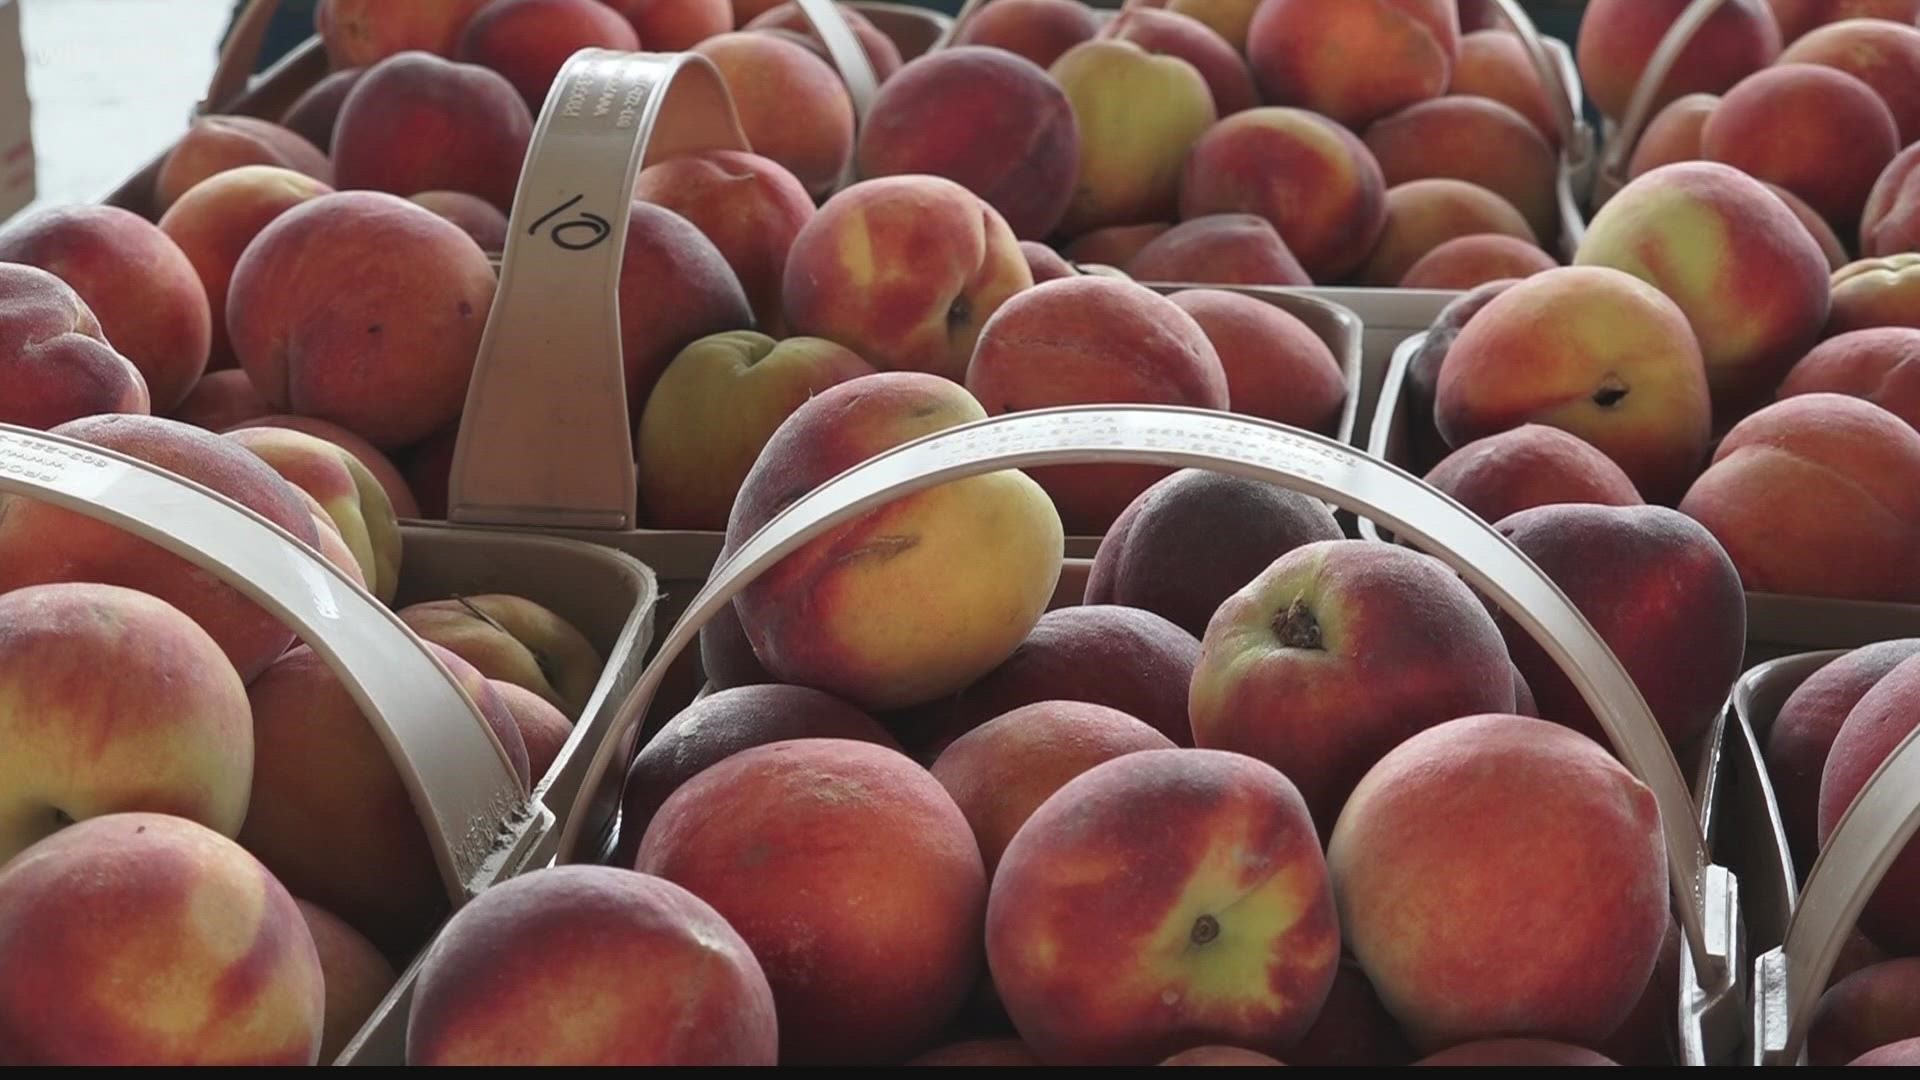 How will inflation impact the supply of peach cobbler and peach ice cream this weekend? News 19's Peyton Lewis takes a look.